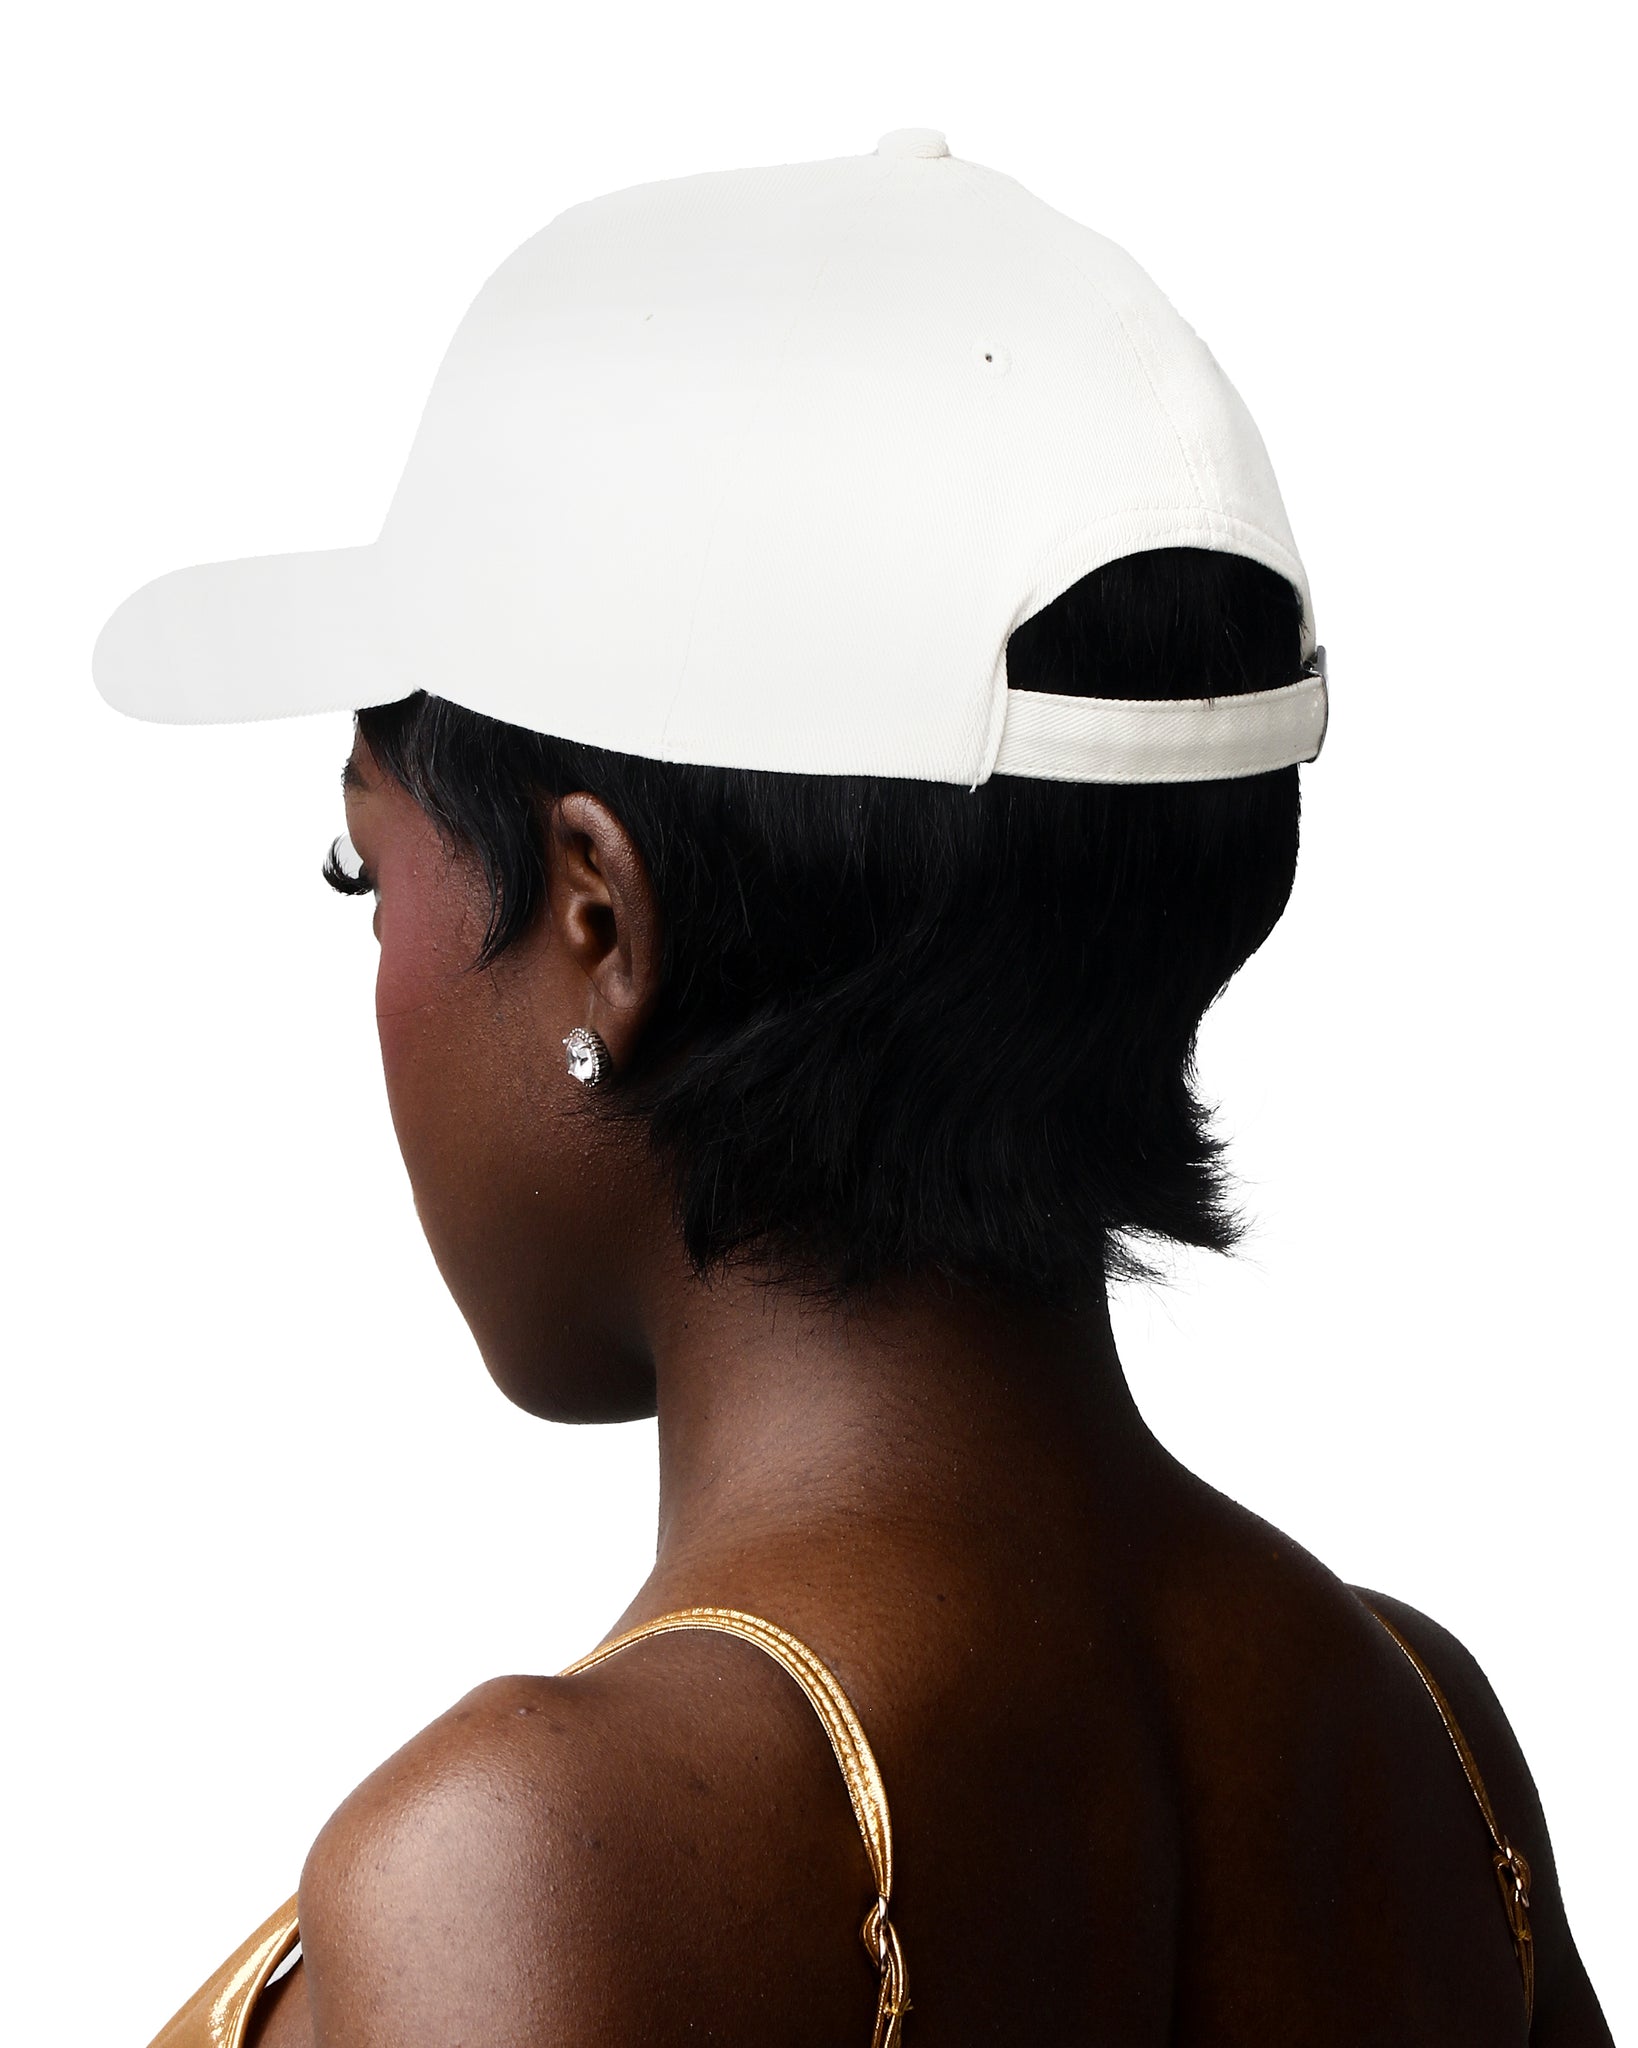 Cream cotton cap with a front logo, offering both style and functionality.